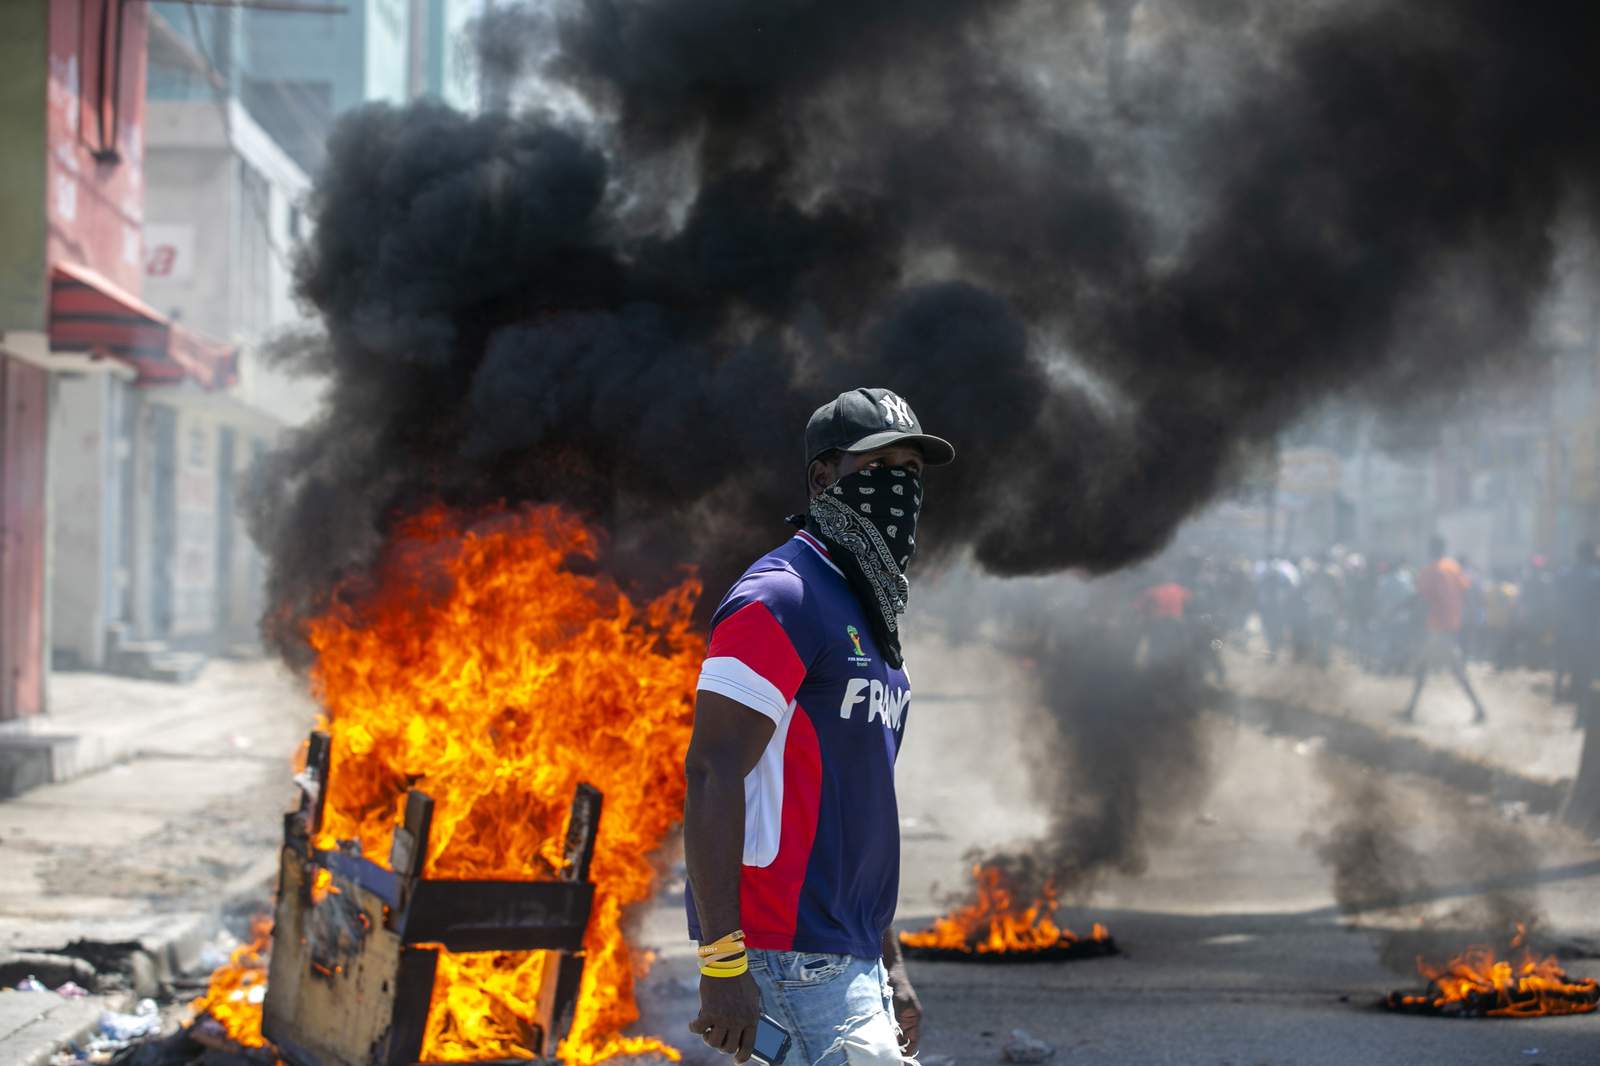 Haitian police, protesters clash; president calls for unity